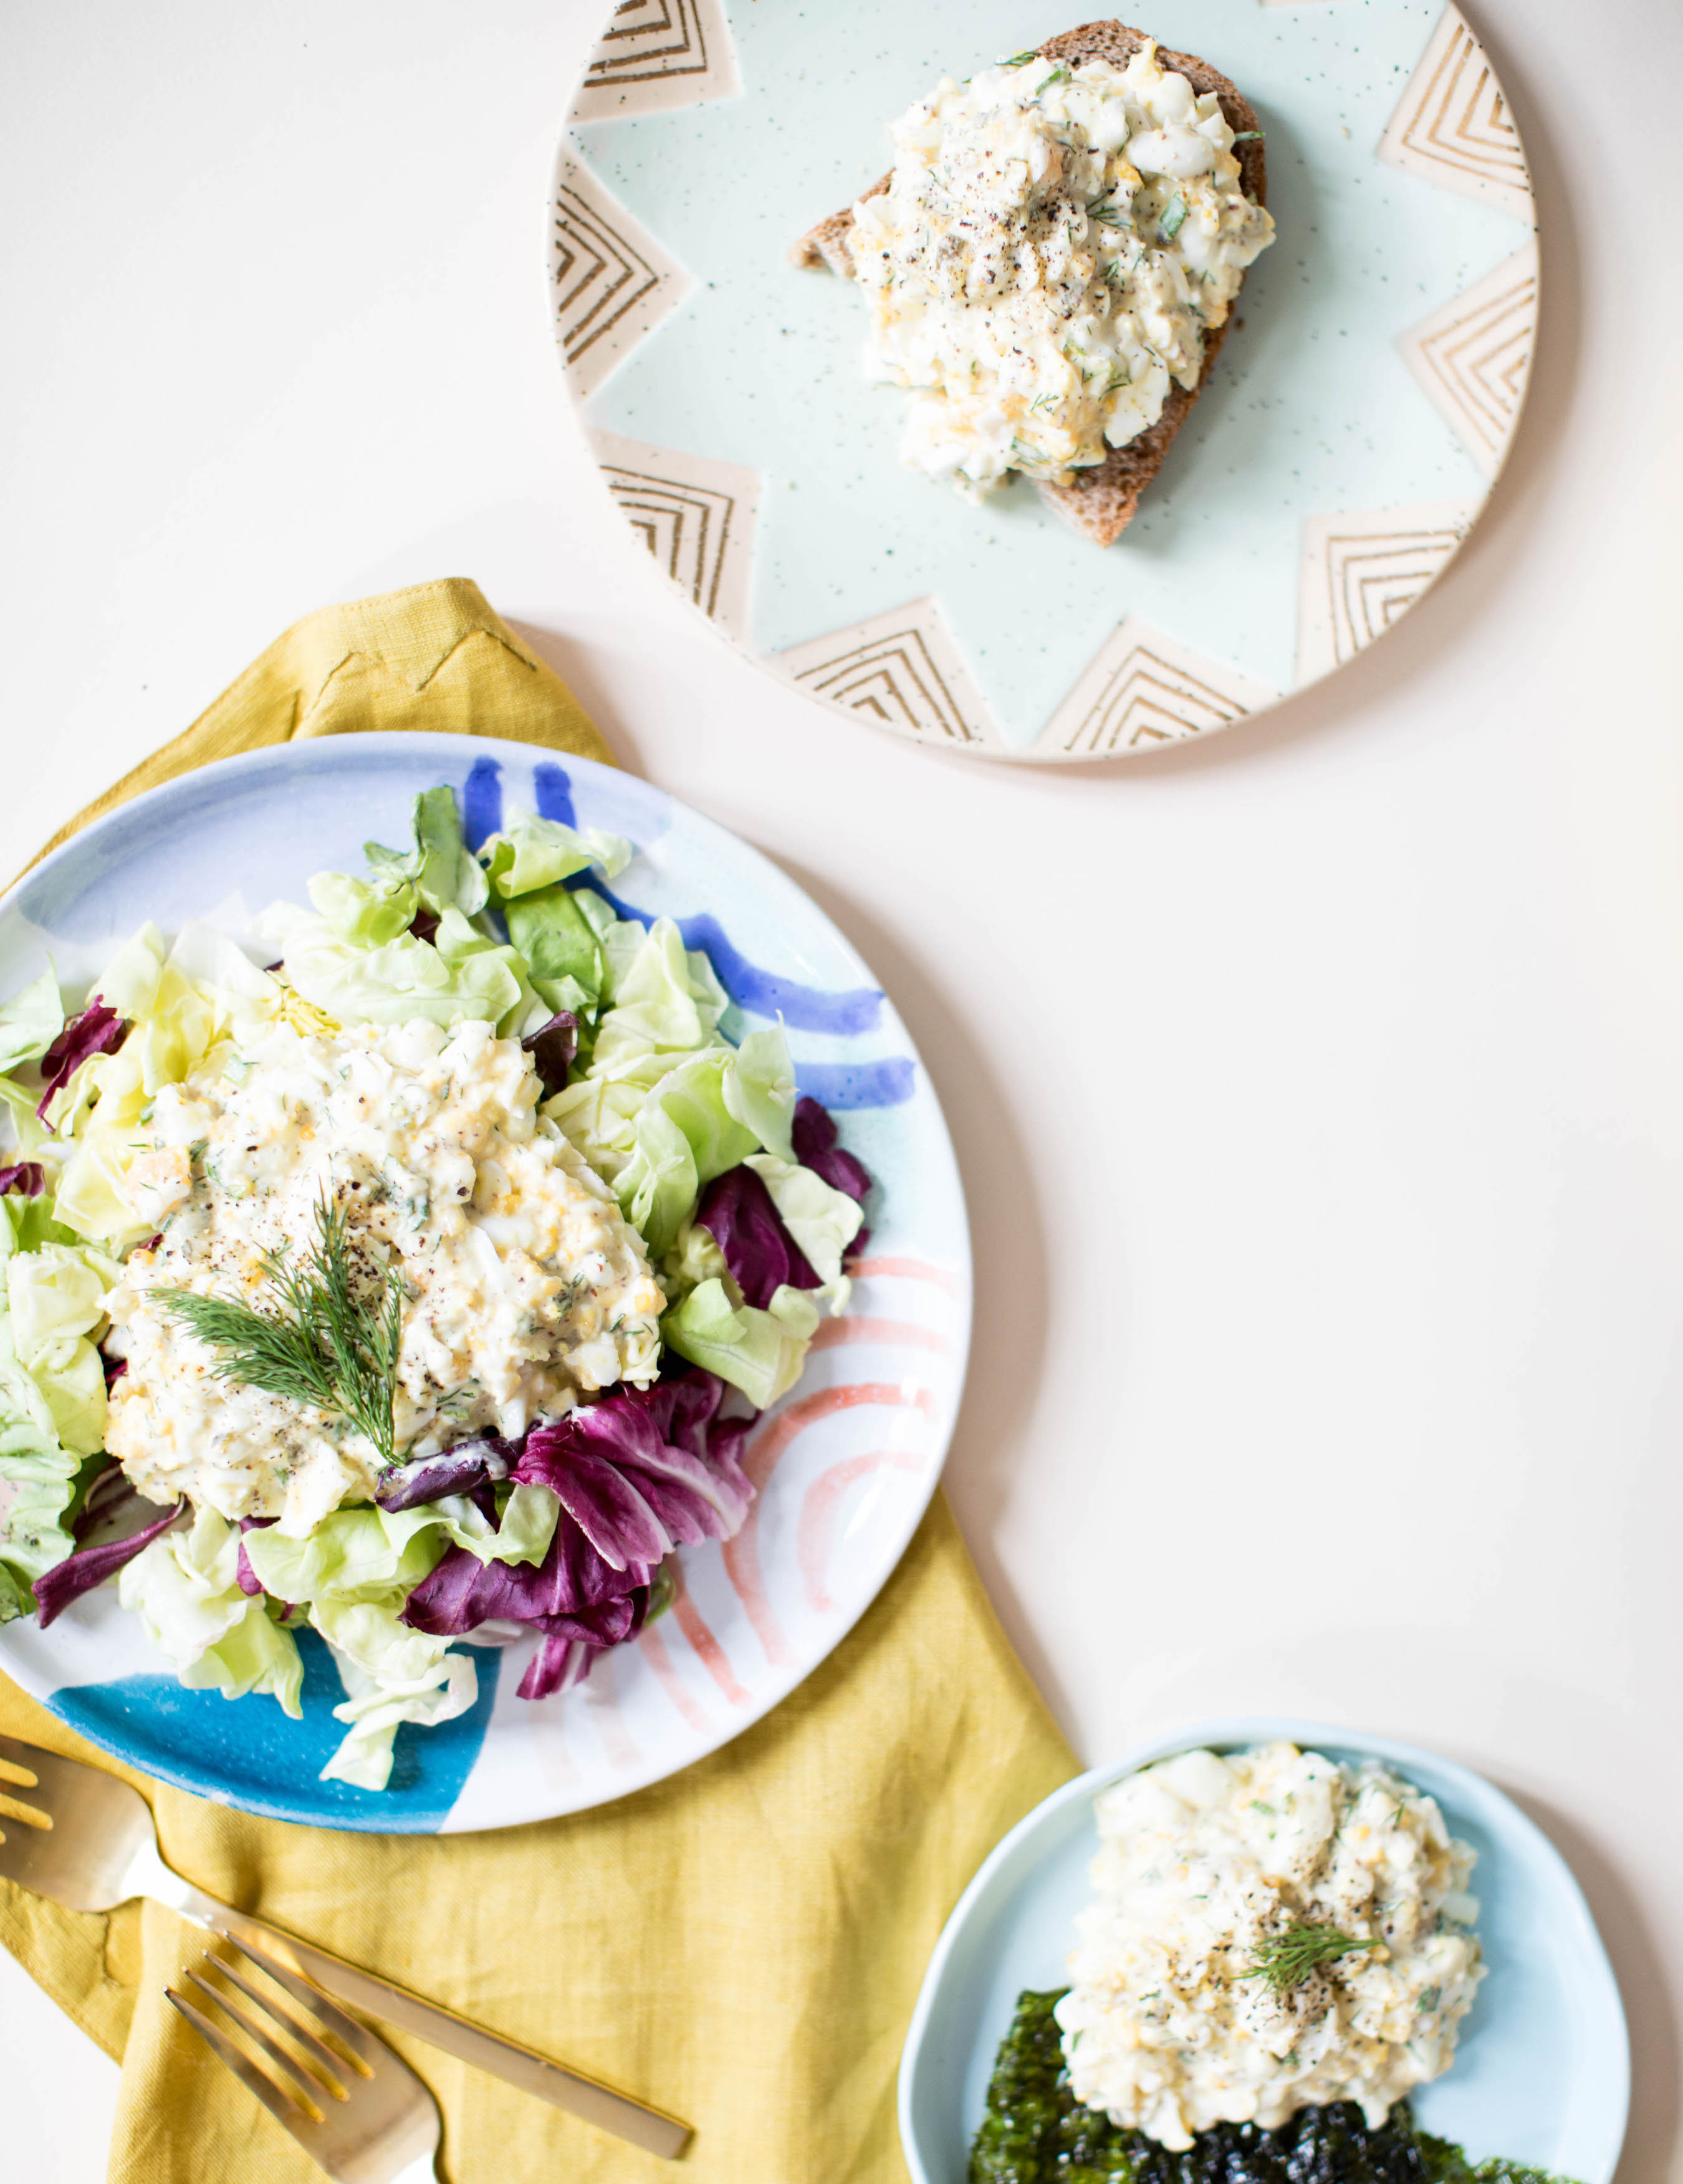 Easily The Best Egg Salad | Nutrition Stripped